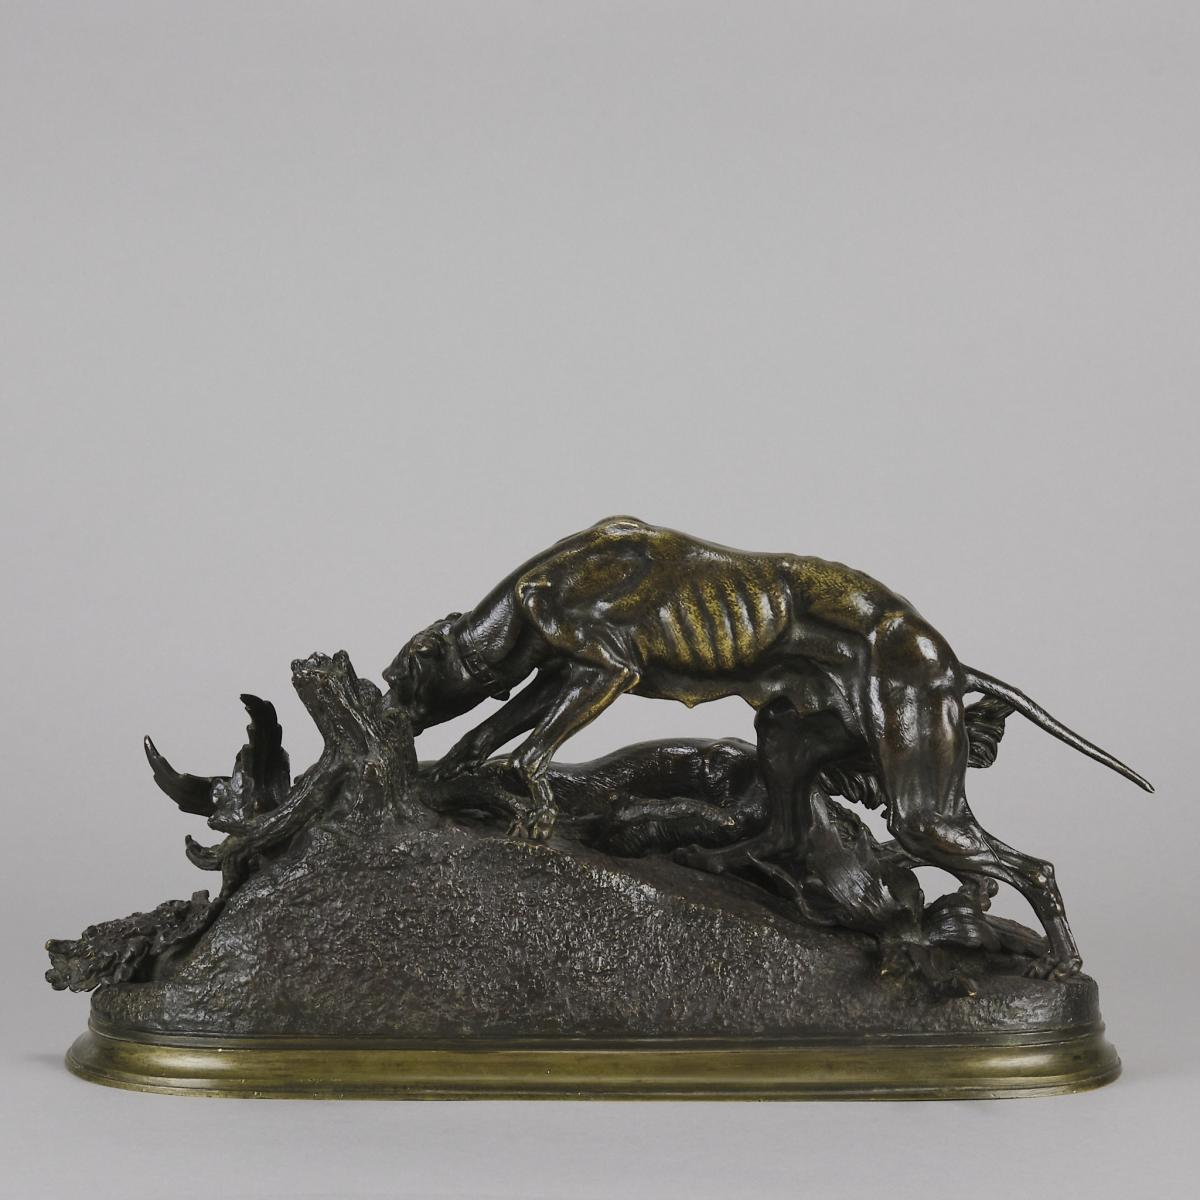 French animalier bronze entitled "Chasse au Lapin" by Jules Moigniez - 1870